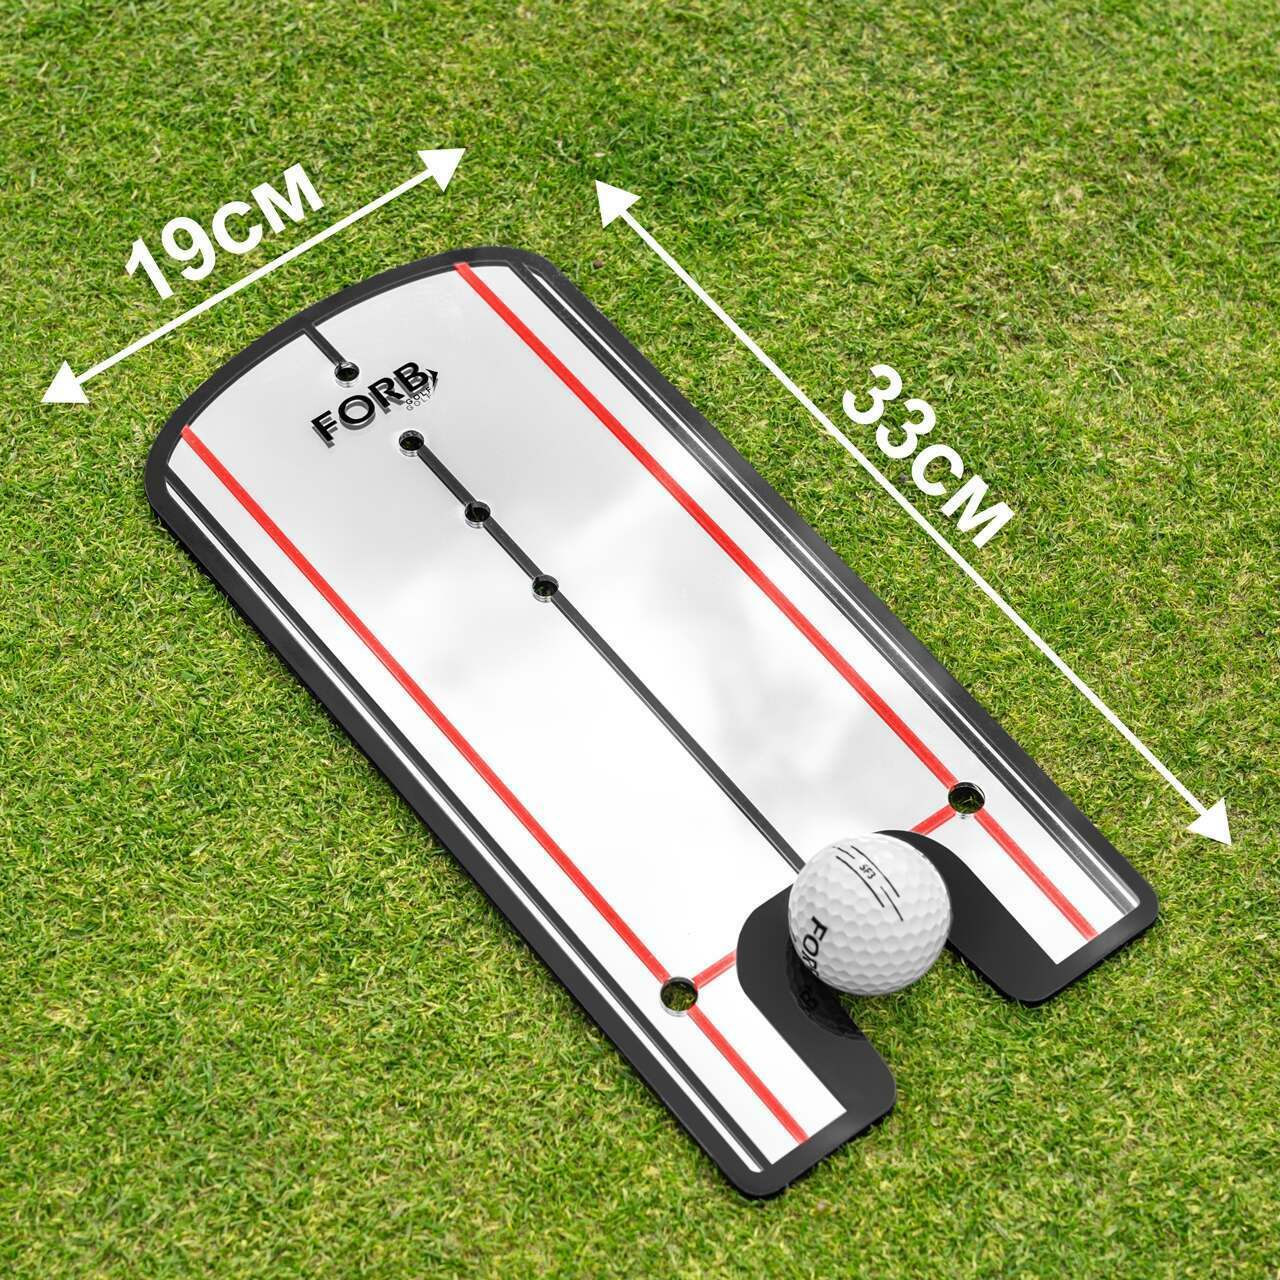 FORB Golf Putting Alignment Mirror